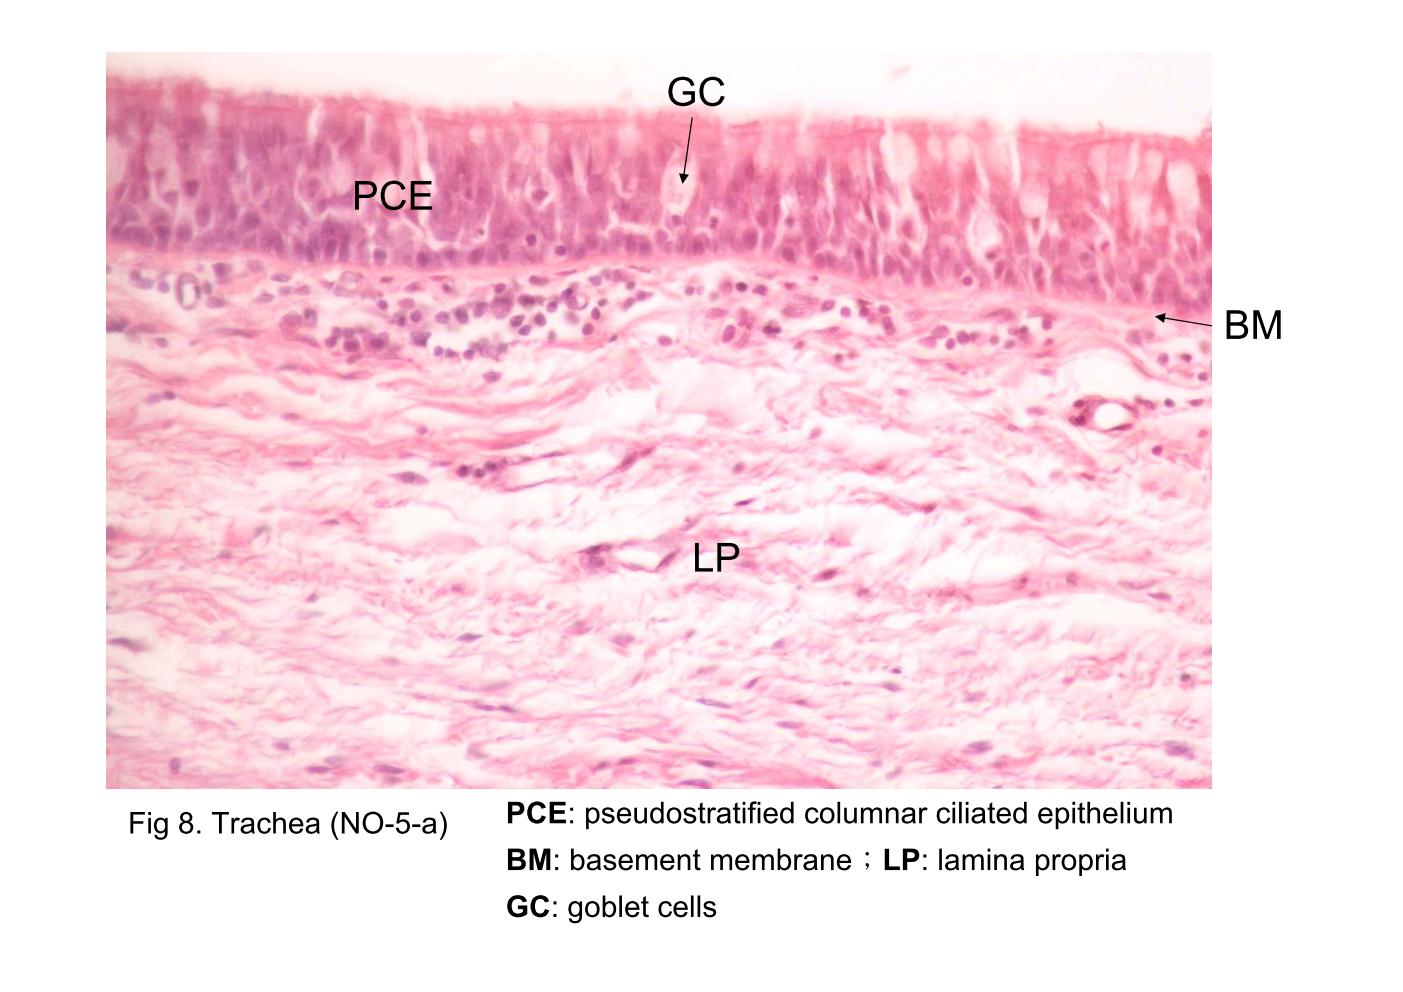 block9_19.jpg - Fig 8 & 9. Trachea (NO-5-a)The wall of the trachea shows the pseudostratified columnar ciliated epithelium (PCE) located on a well-developed basement membrane (BM). A thin lamina propria (LP) and a dense thick submucosa (SM) underlie the respiratory epithelium. Numerous goblet cells (GC) are evident as clear ovoid spaces in the respiratory epithelium. Seromucous glands (tracheal glands) (TG) are seen in the submucosa.